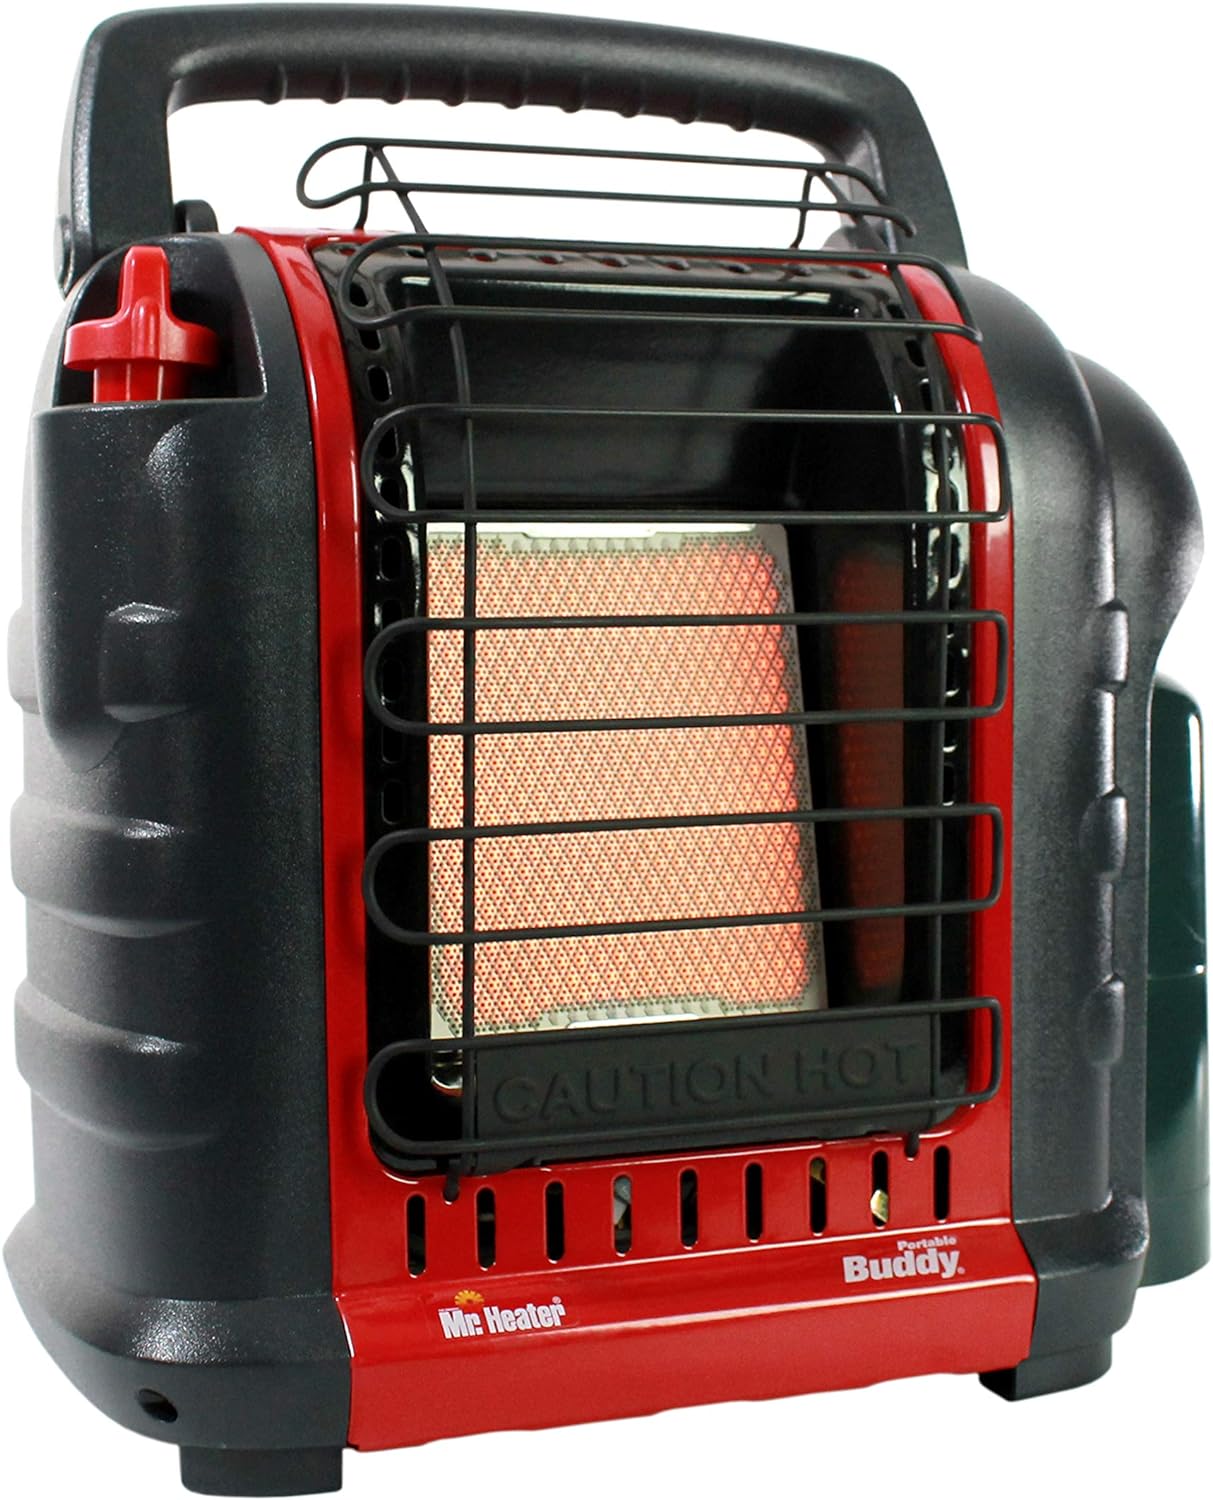 Mr. Heater MH9BX-Massachusetts/Canada Approved Portable Propane Heater Review